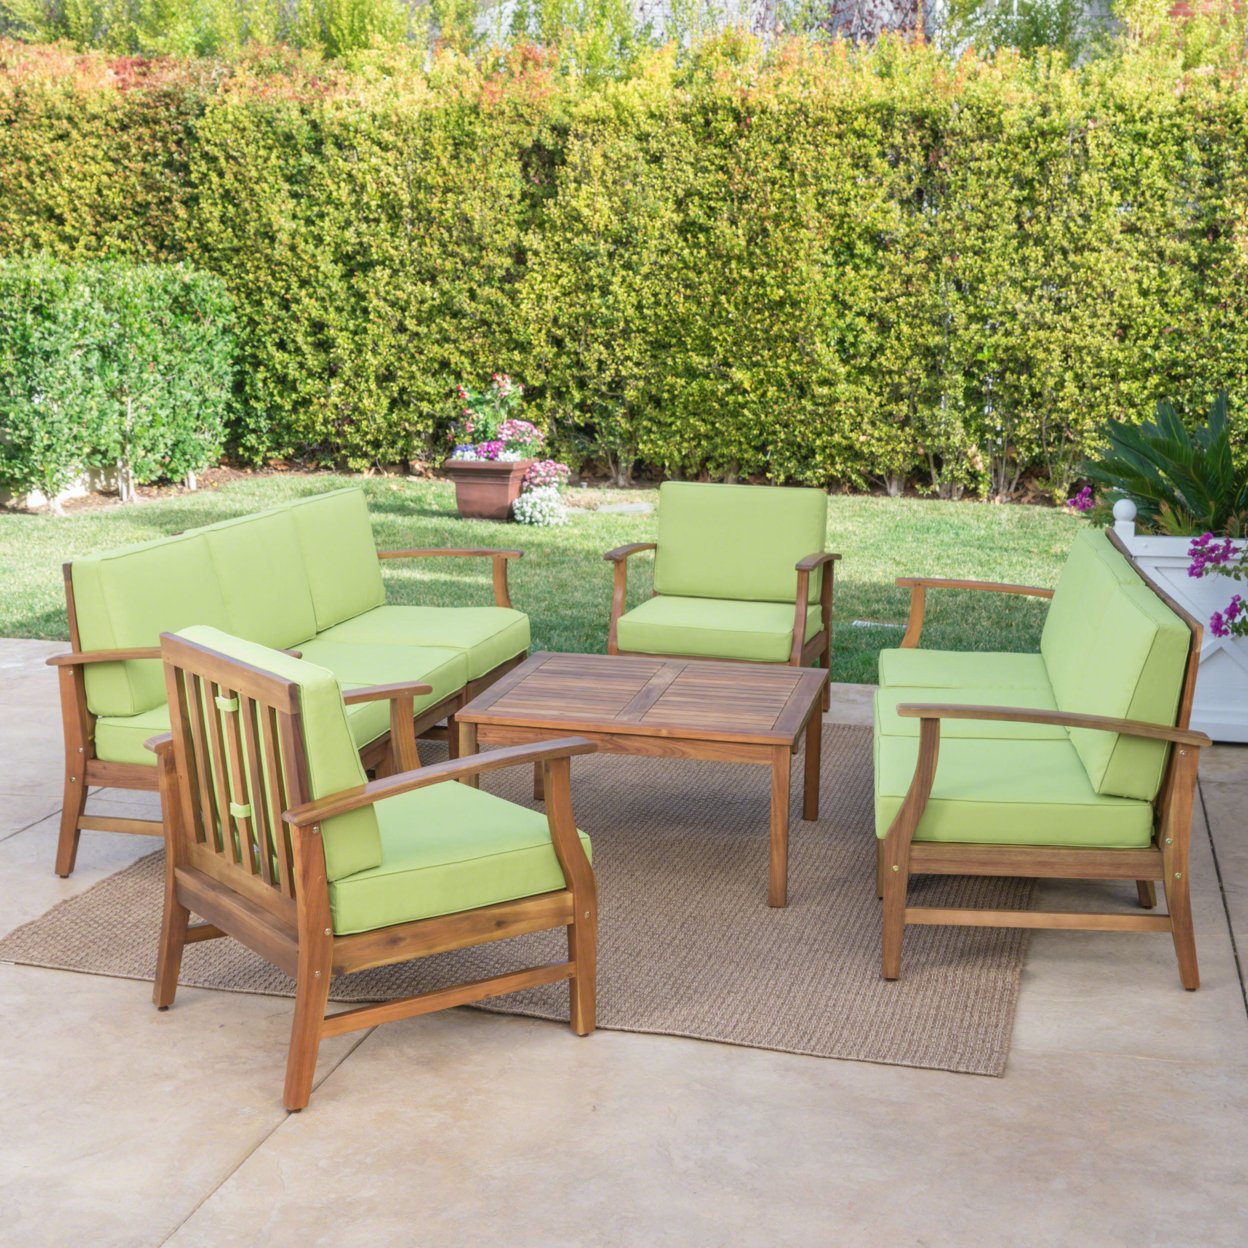 Scarlett Outdoor 8 Seat Teak Finished Acacia Wood Sofa And Table Set - Green